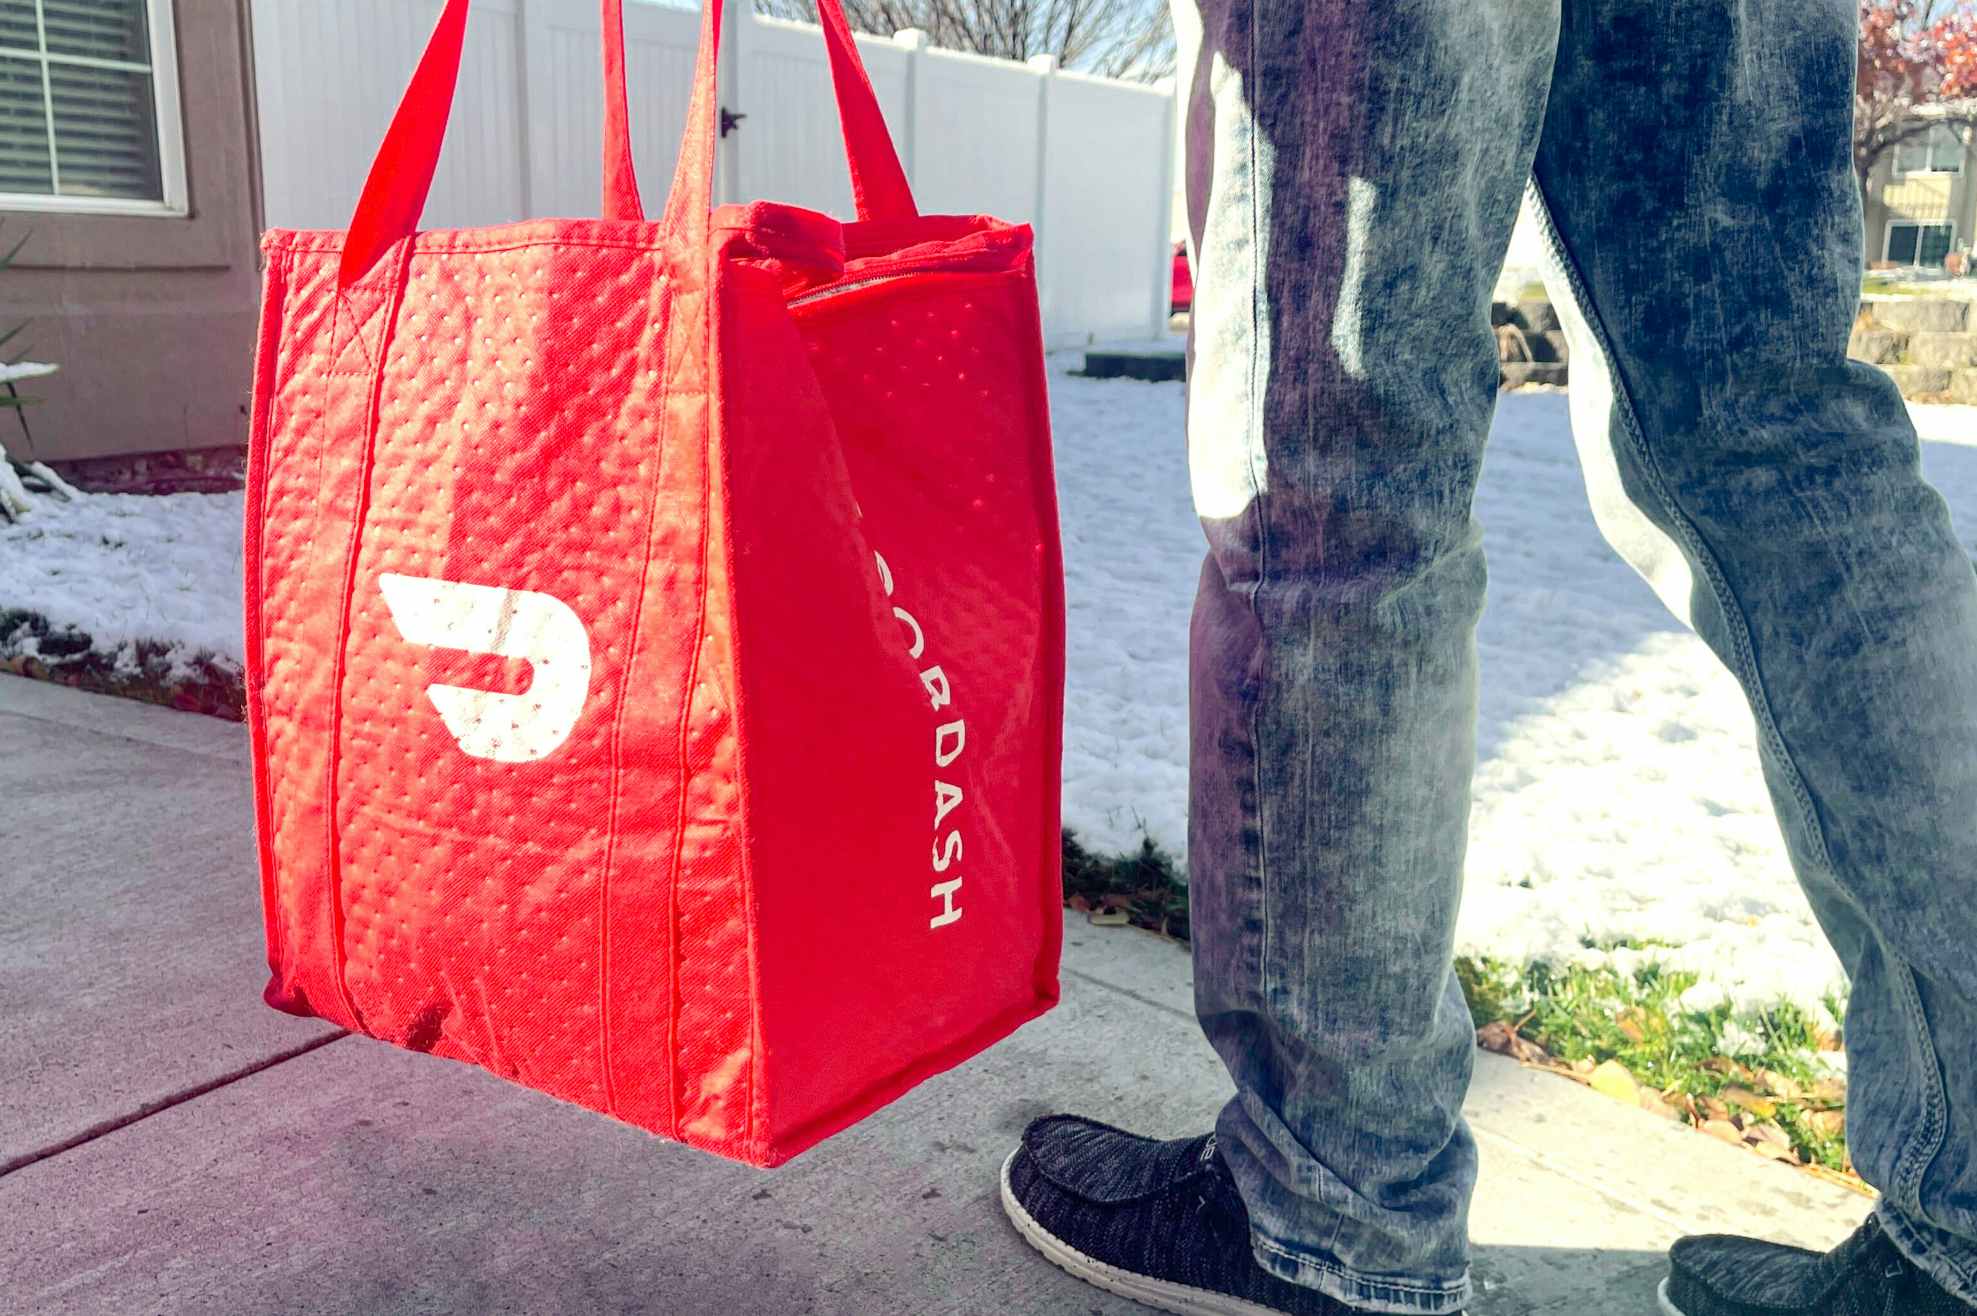 person walking while holding Doordash food delivery bag